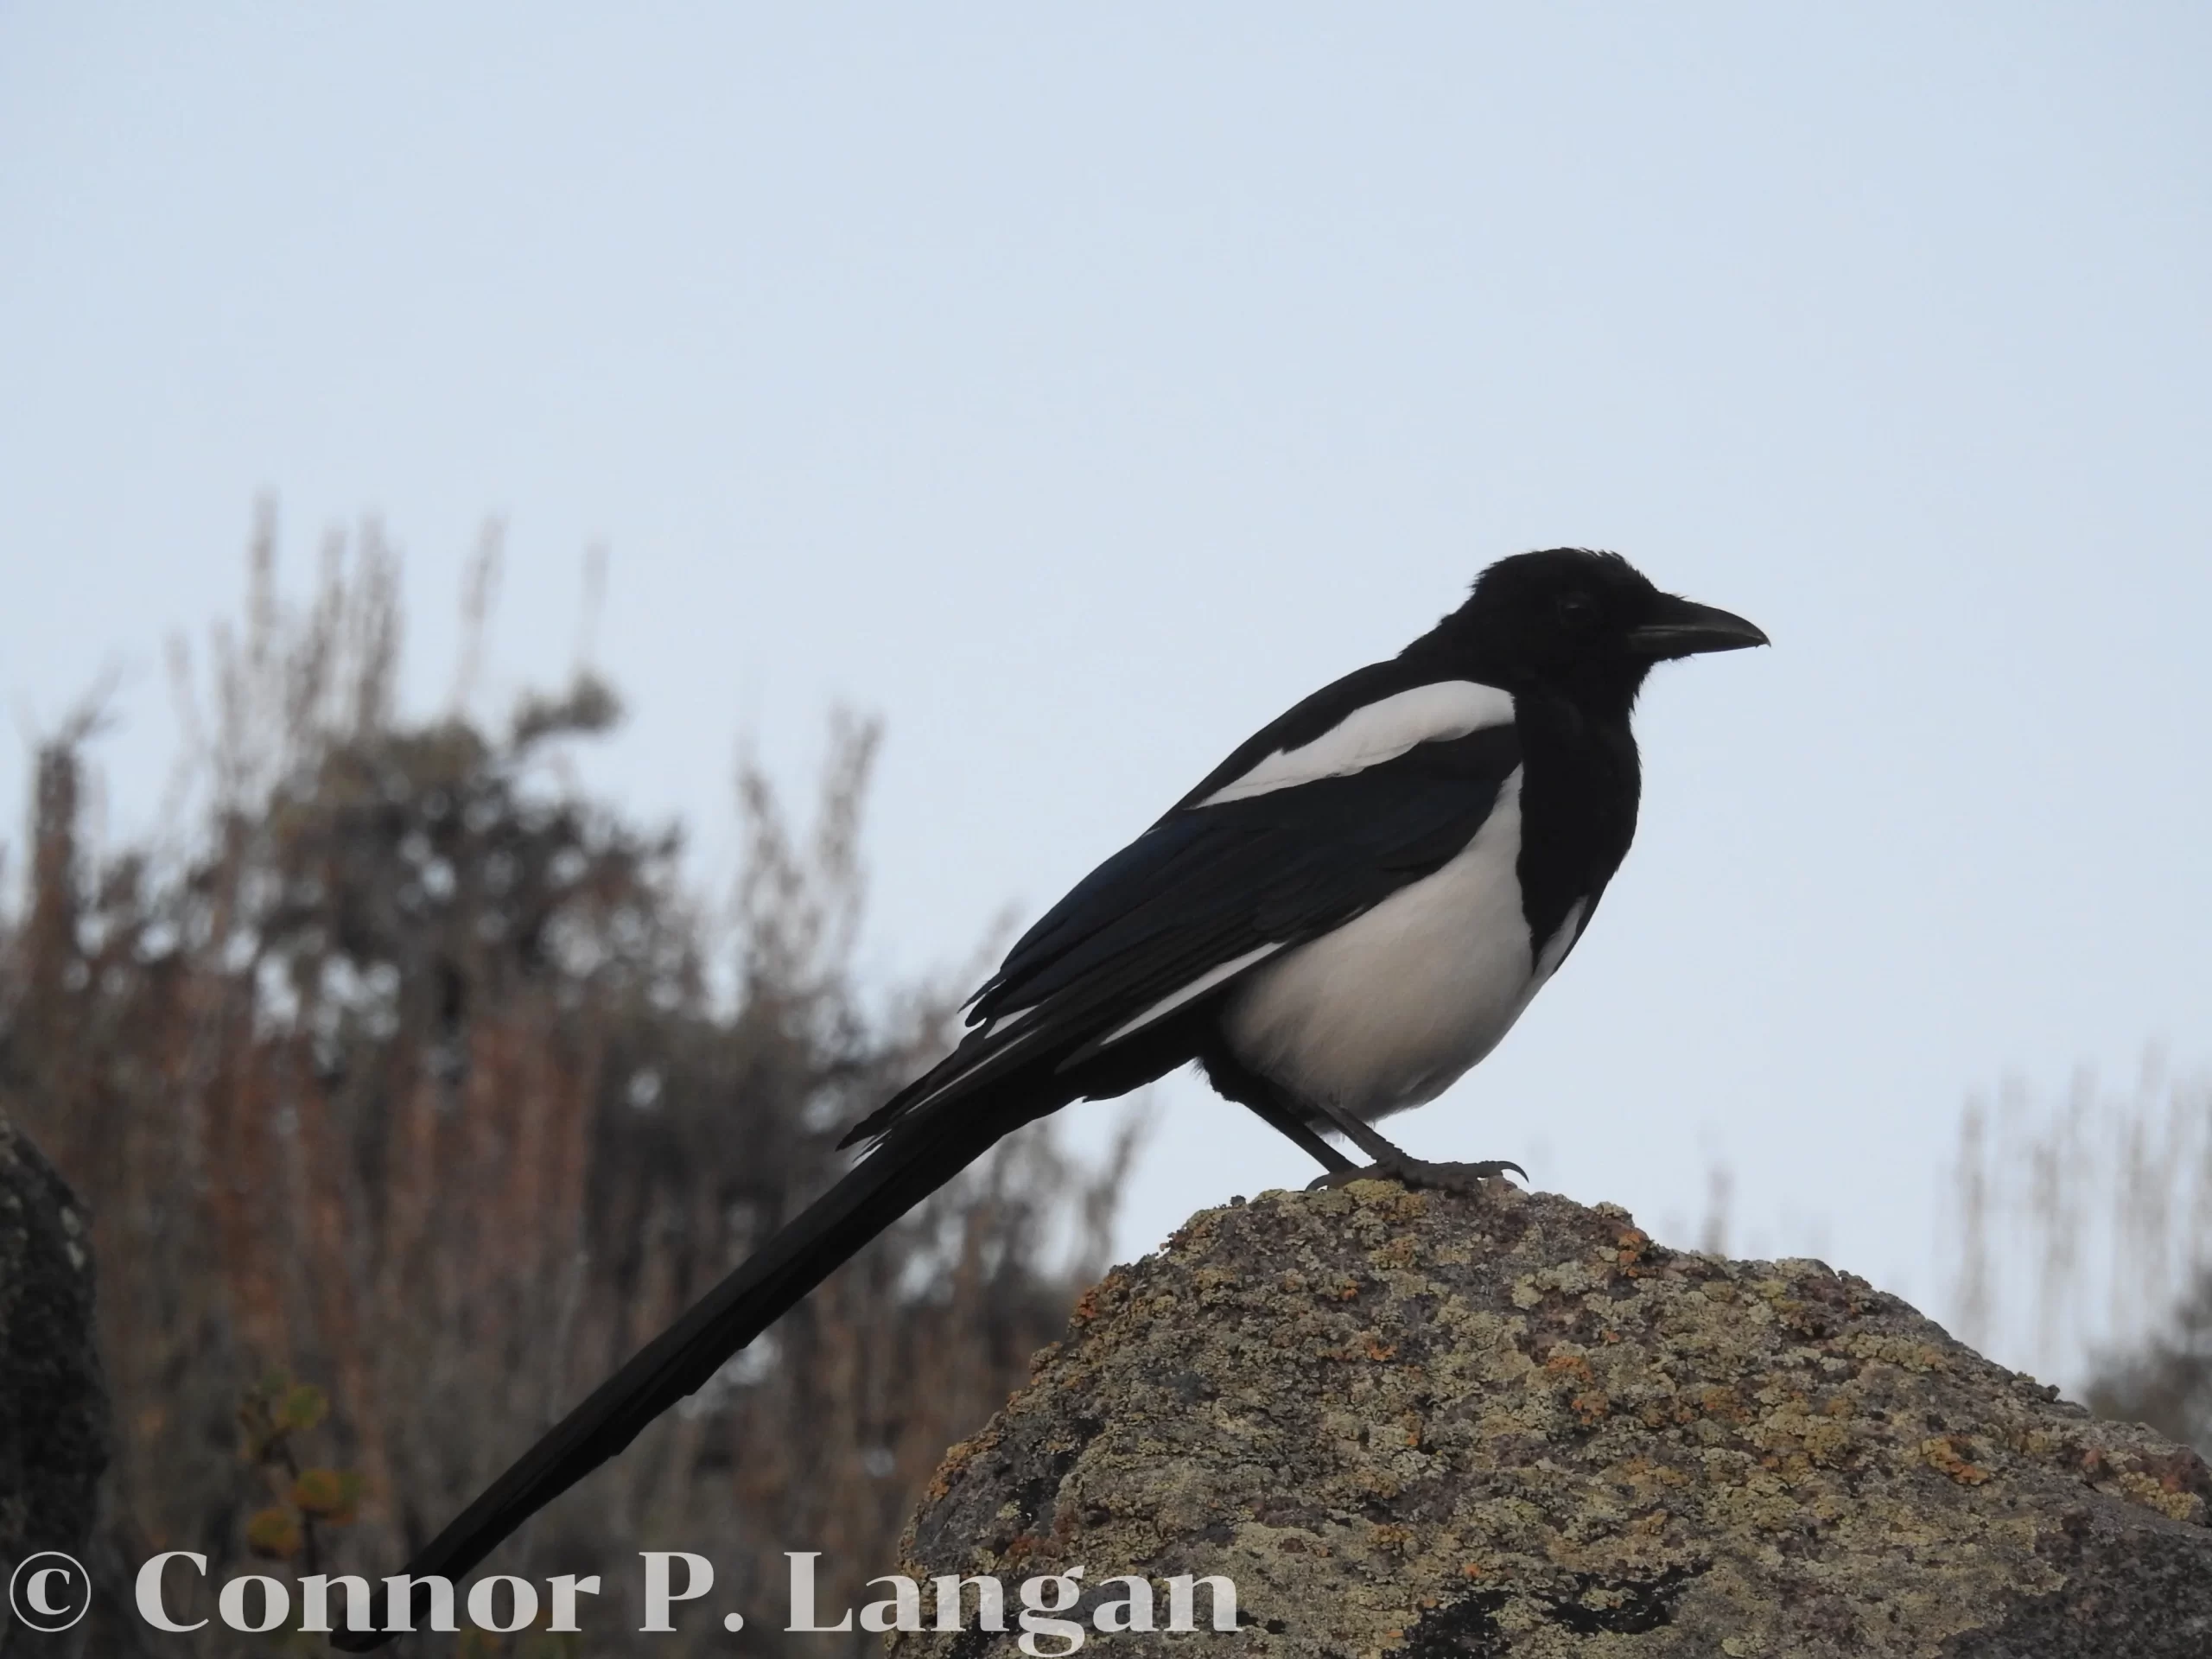 A Black-billed Magpie cautiously checks its surroundings from atop a rock.